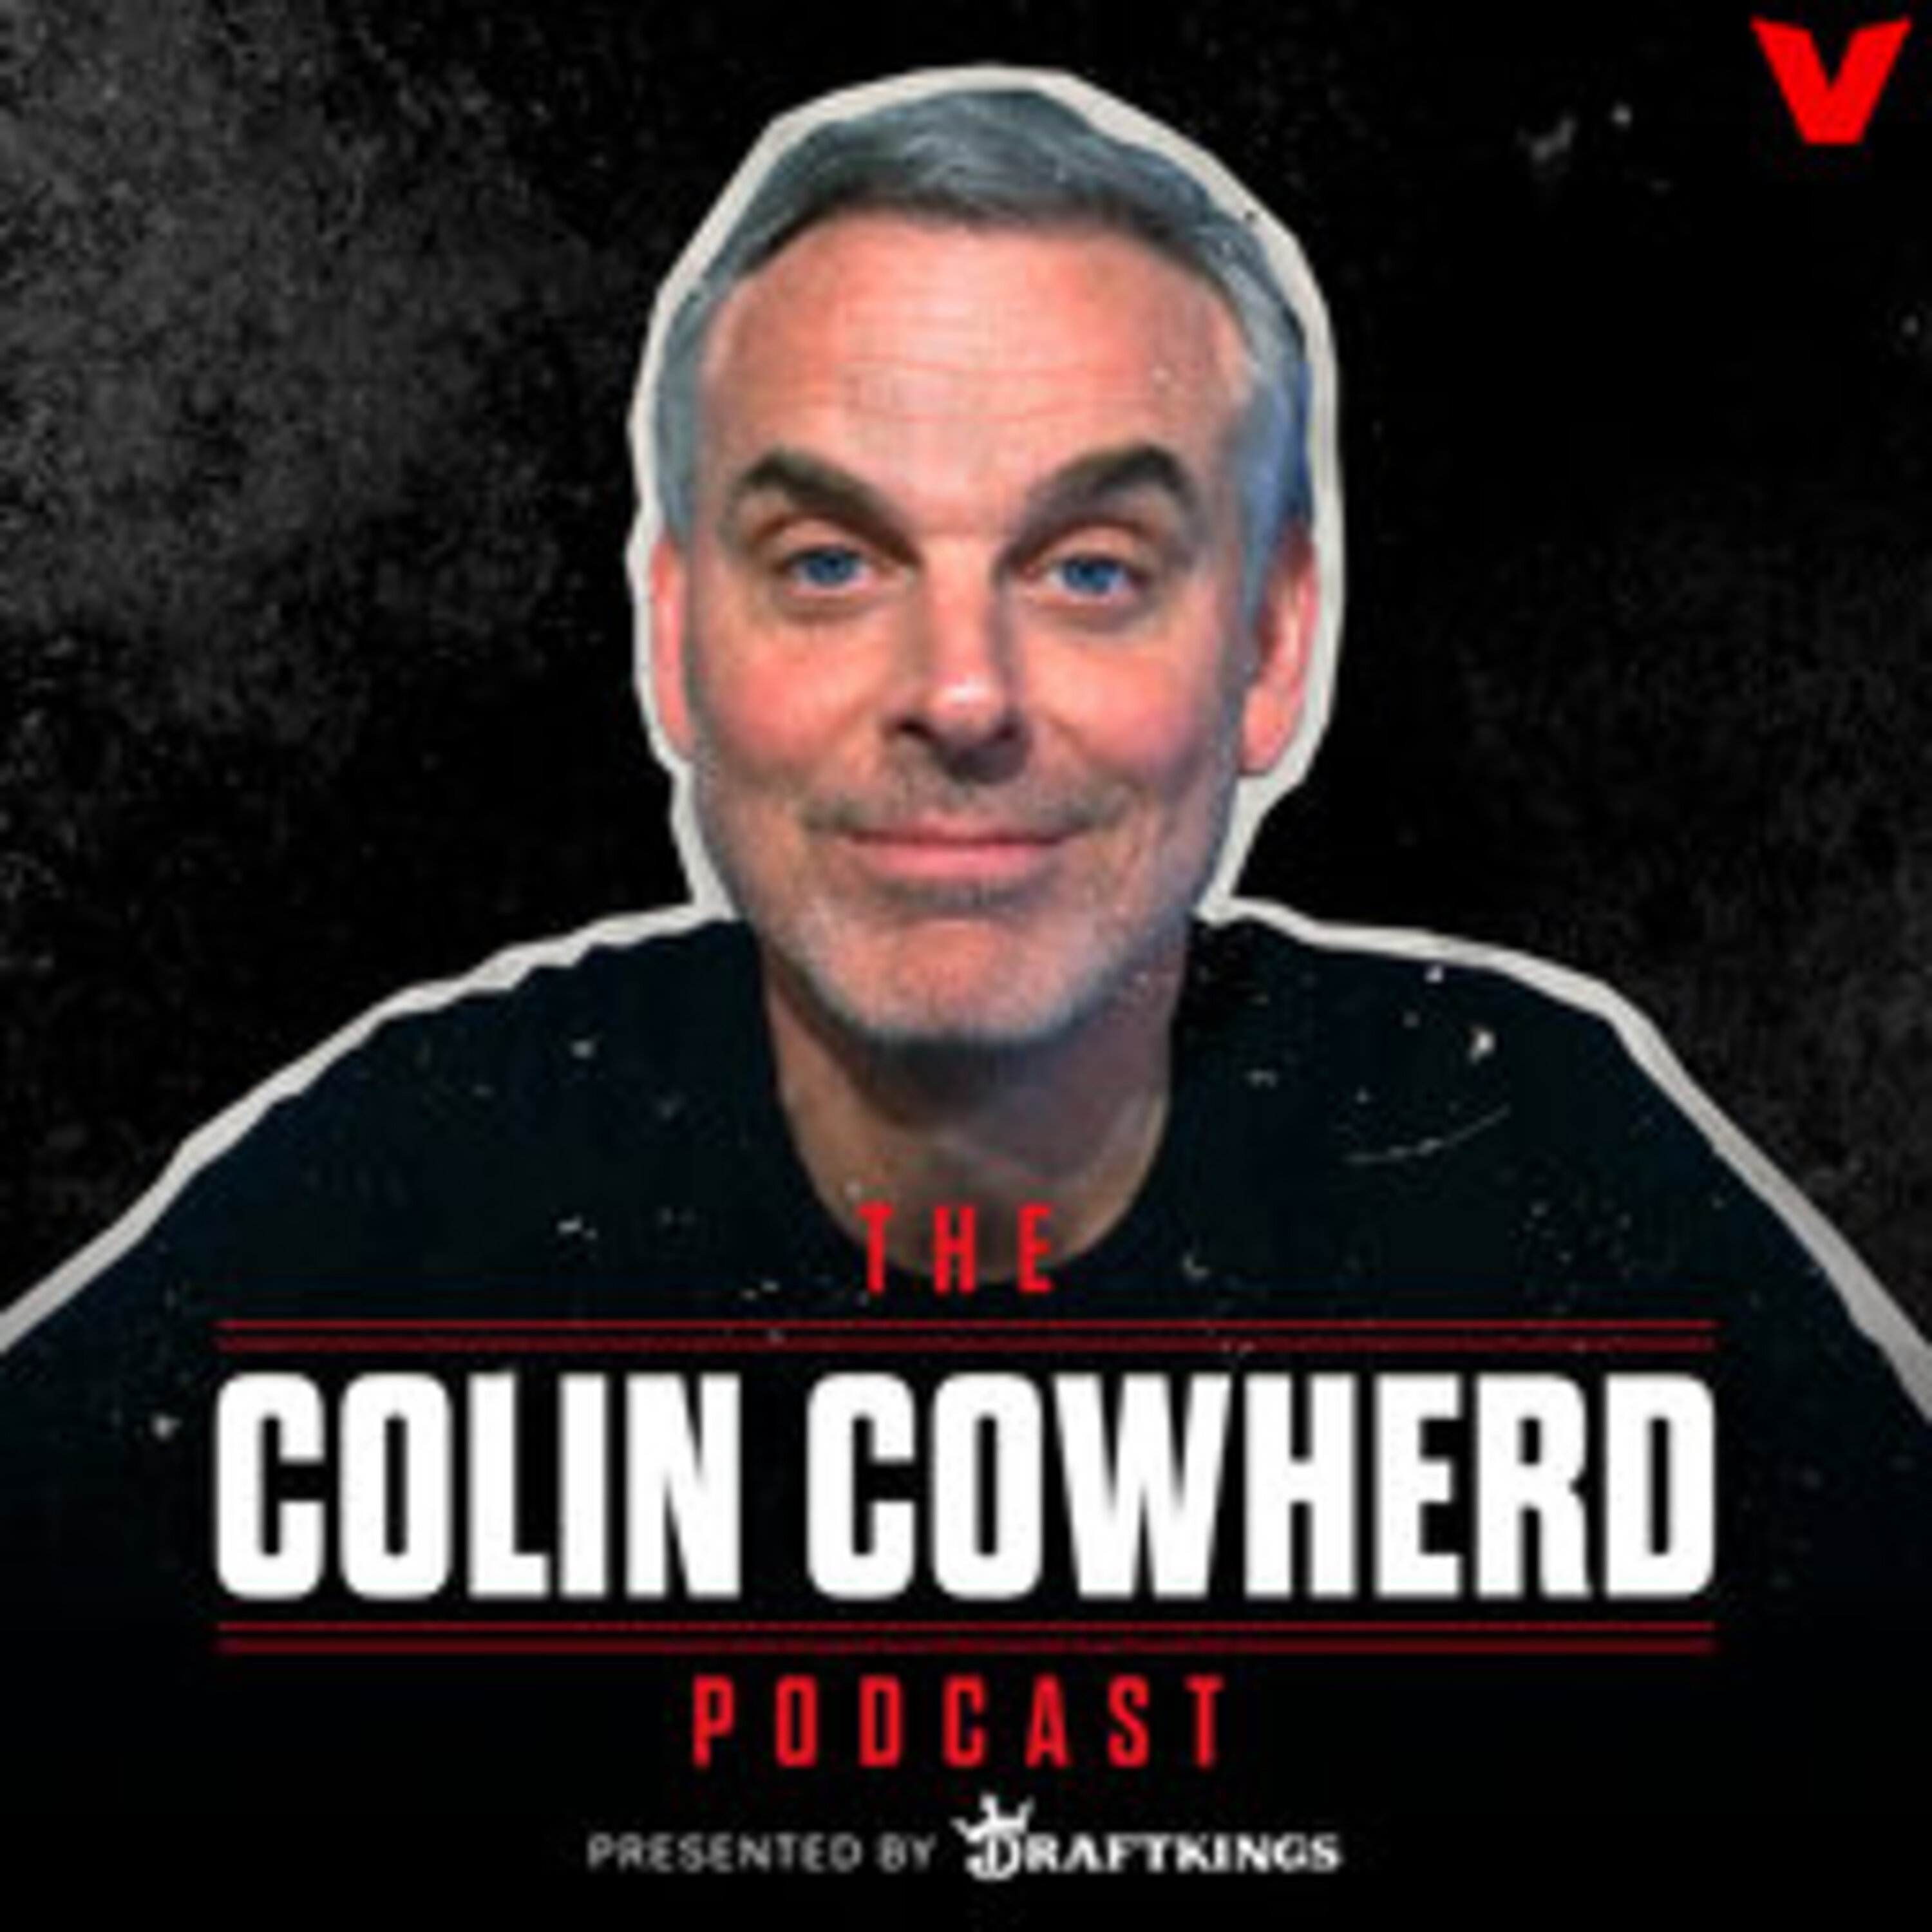 Colin Cowherd Podcast  - INSTANT REACTION: UConn Wins National Championship, Best Candidates To Replace John Calipari